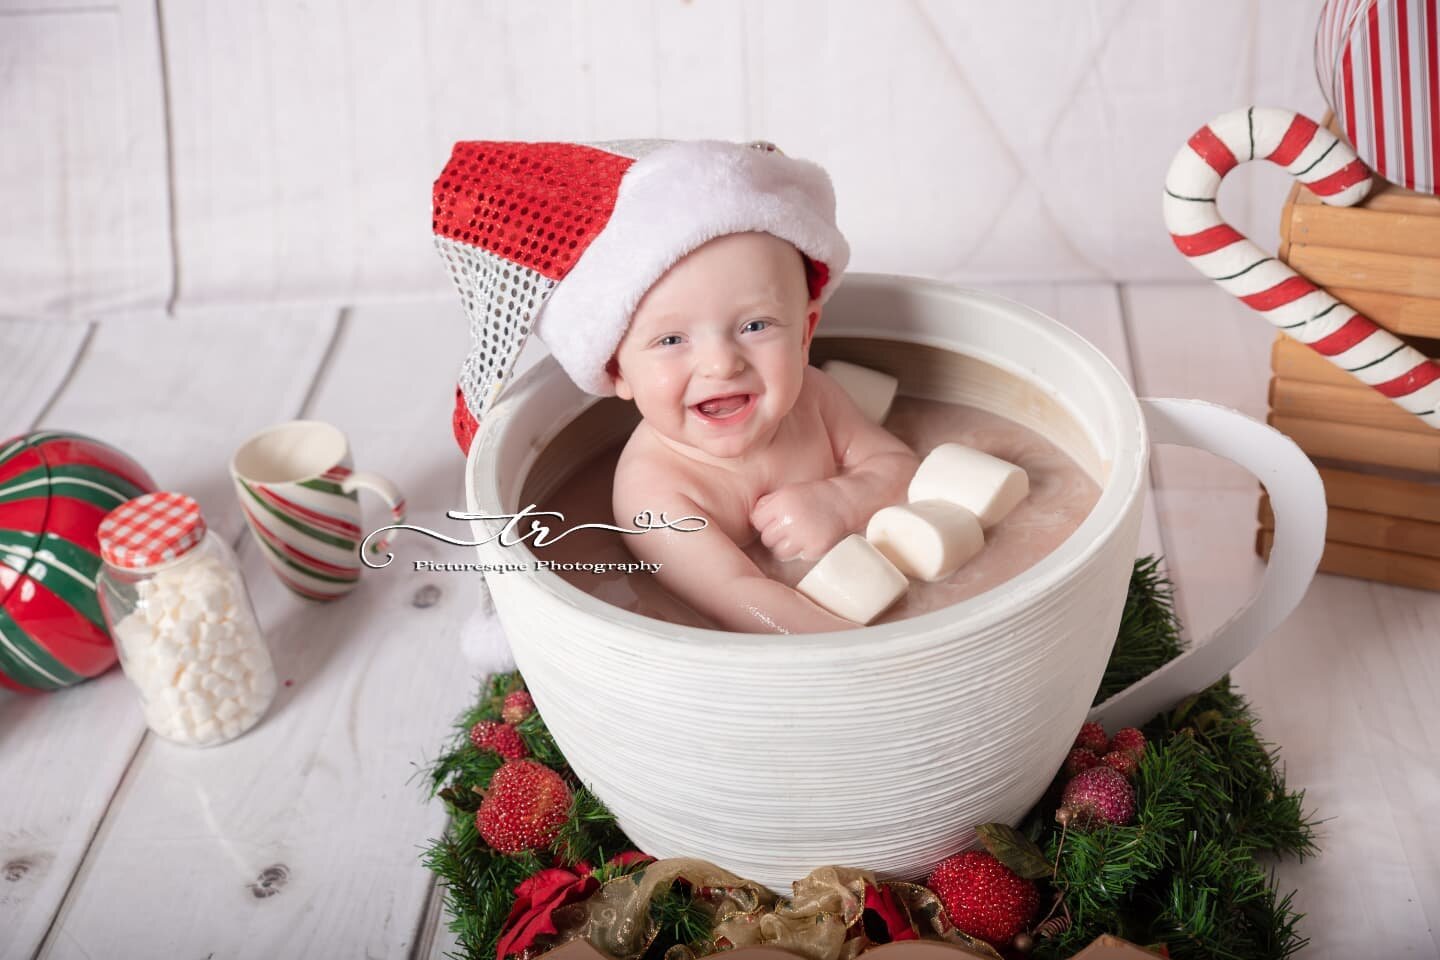 Merry Christmas Eve Eve !!
.
#trpicturesque #hotcocoasessions #hotchocolate #hotcocoa #christmasphotos #sittersession #10months #10monthsold #adorable #santababy #marshmallow #candycane #baby #babyinacup #chunkybaby #winter #happiness #christmaseveev